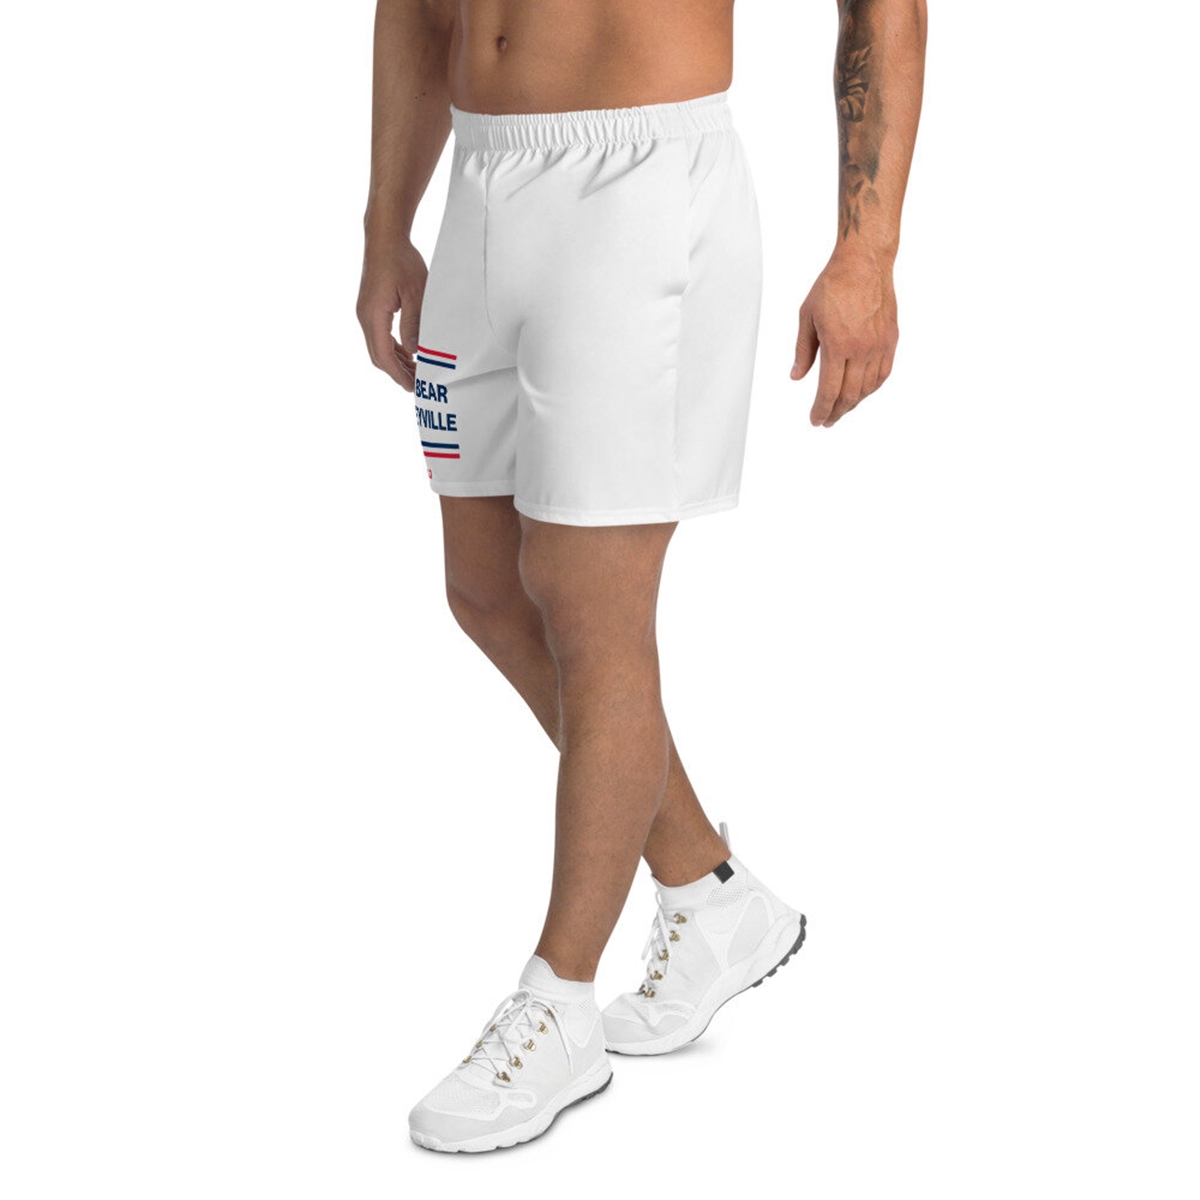 13 Incredible Men’s Long Athletic Shorts For 2023